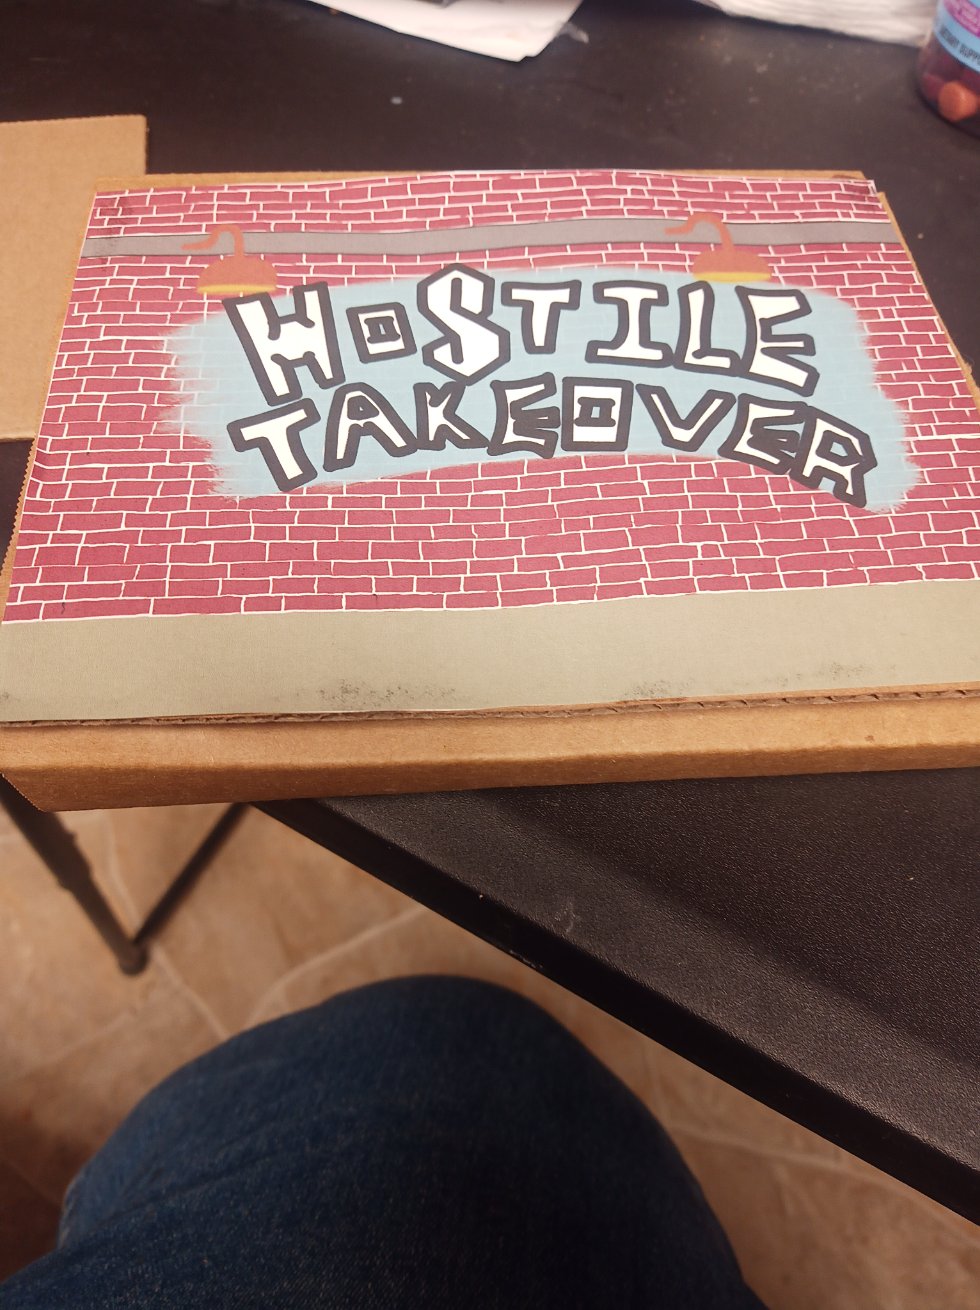 The first hostile takeover box